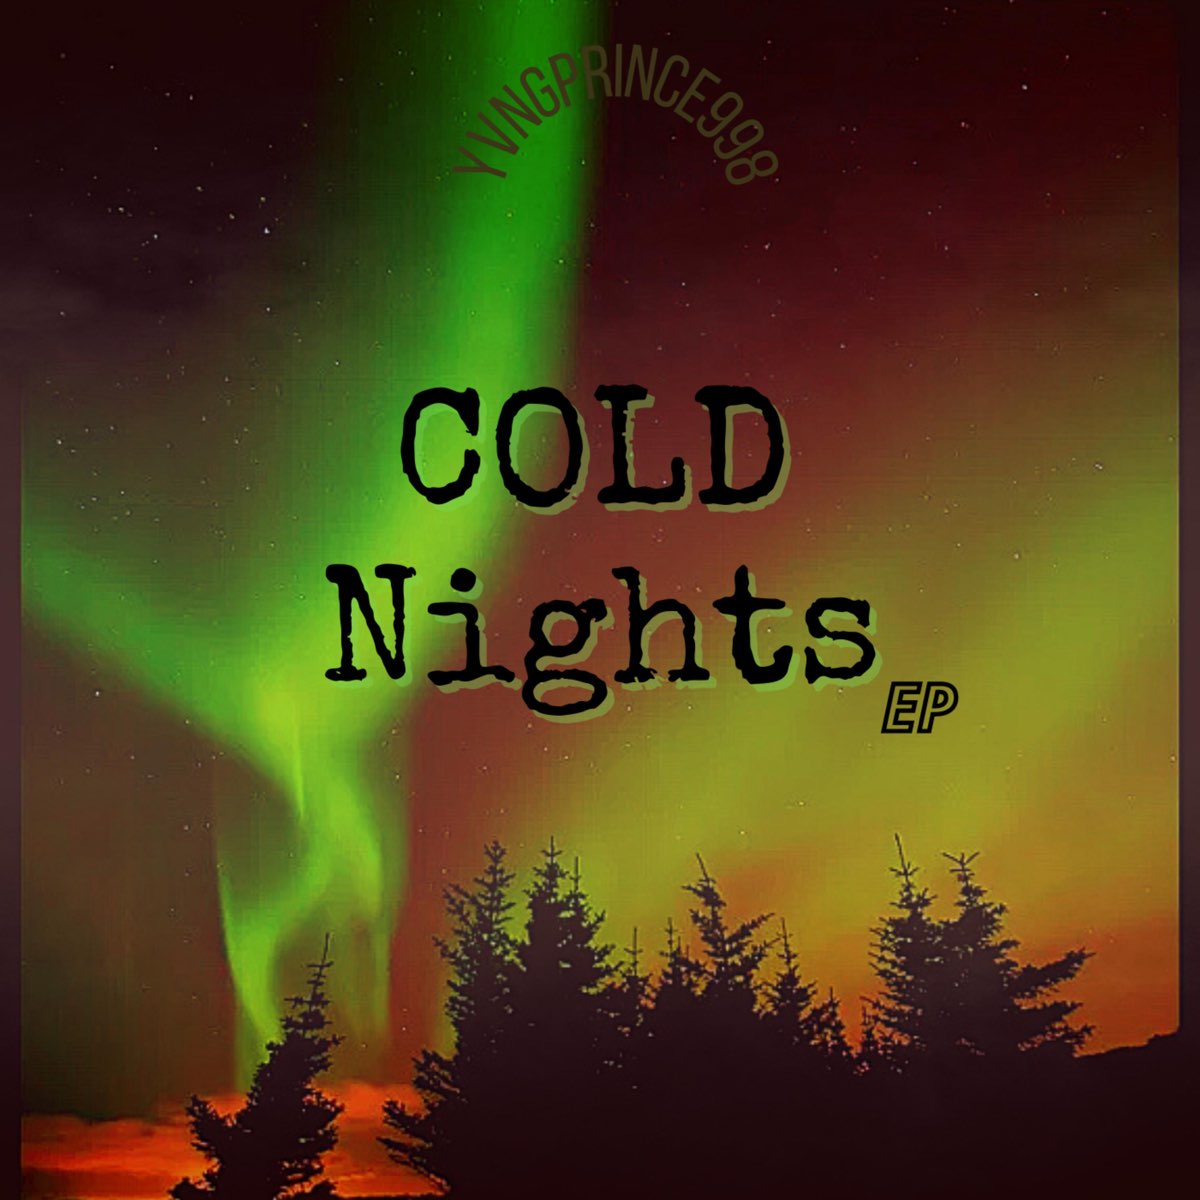 Cold nights 3. Cold Night.